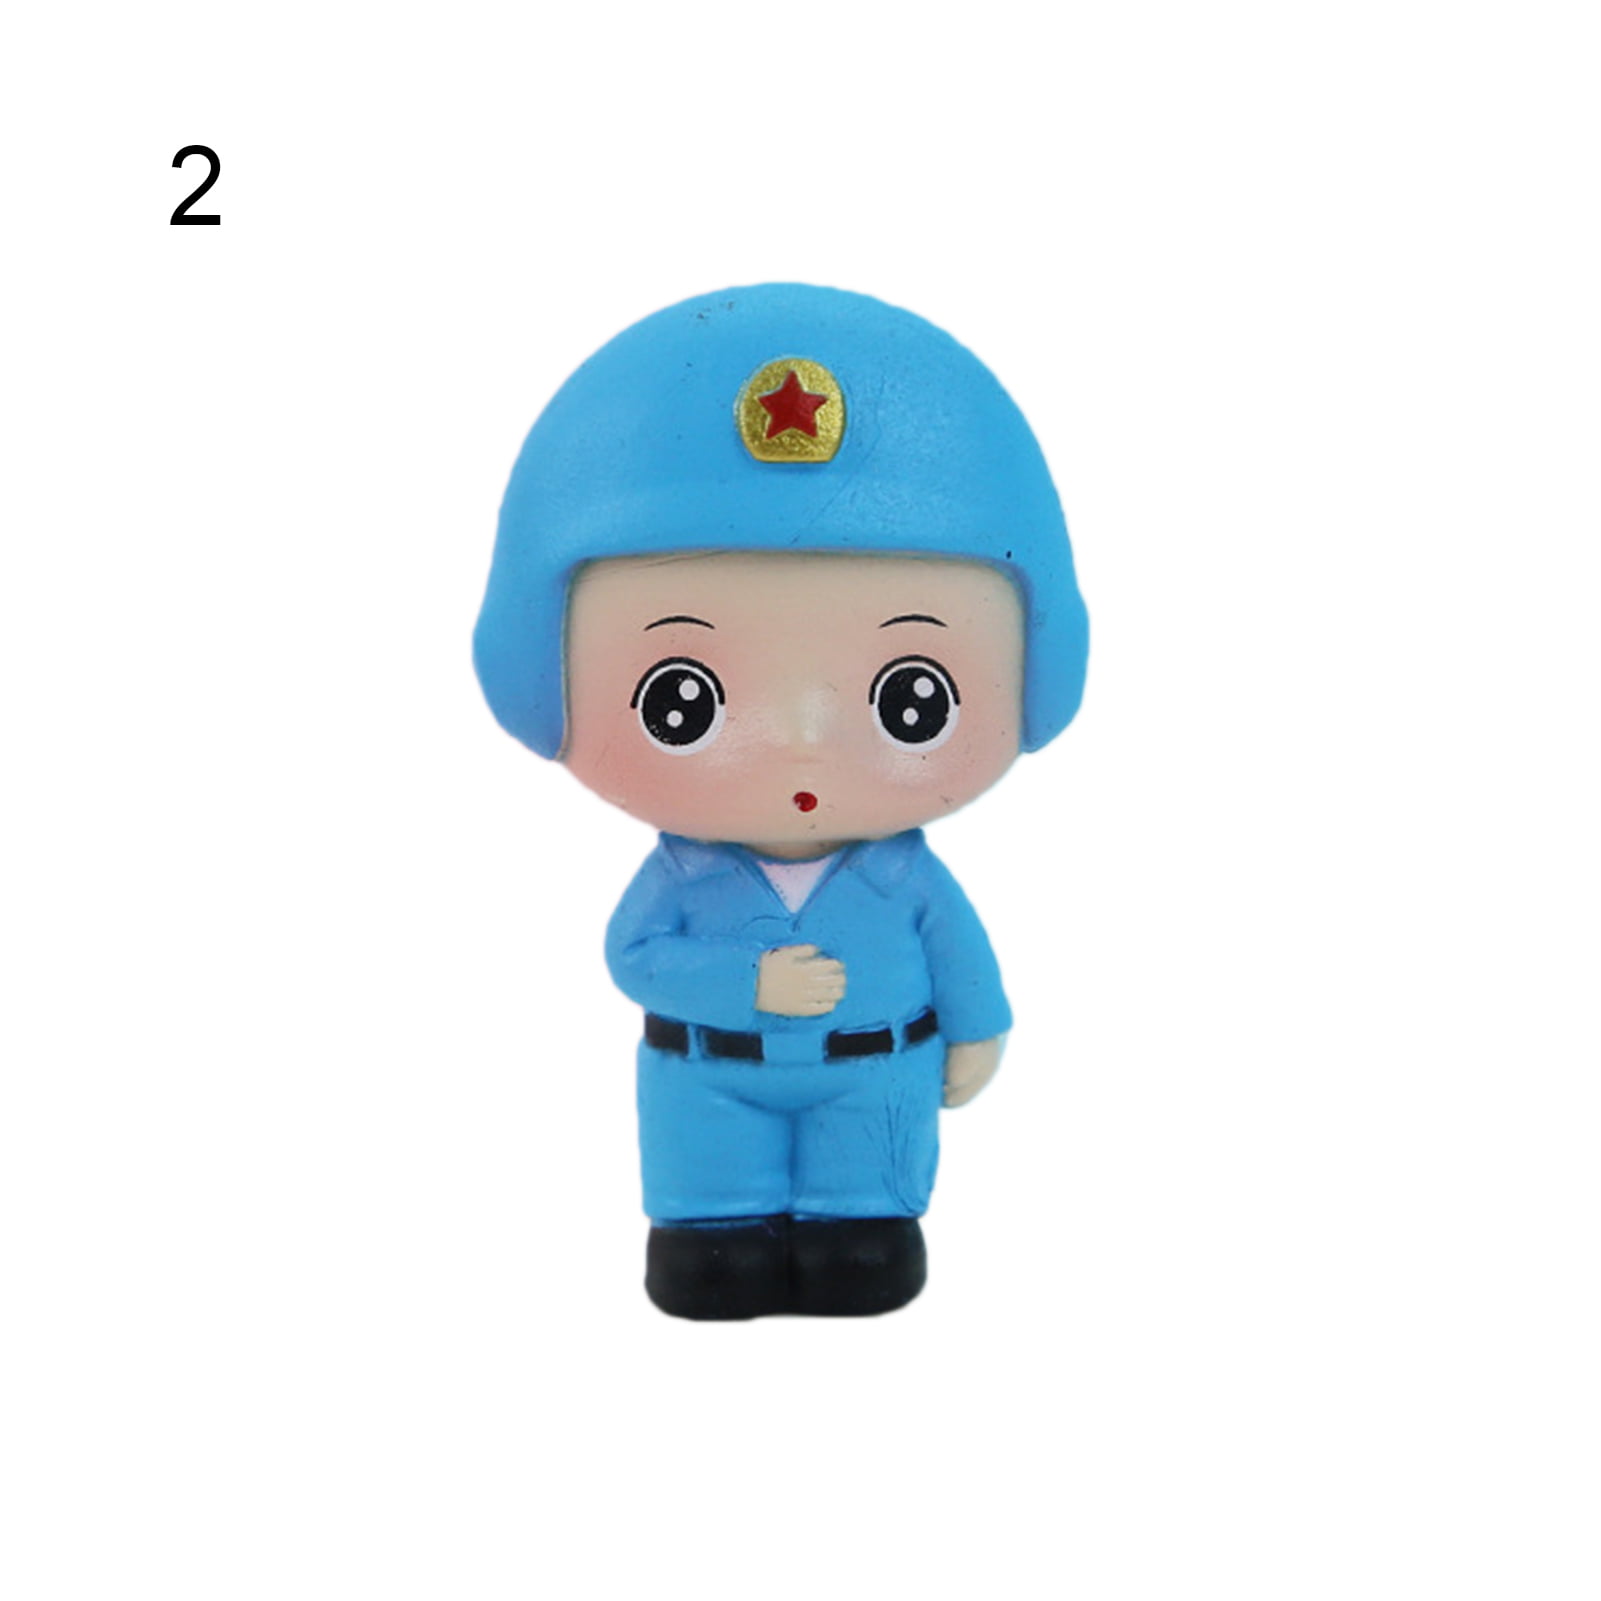 Details about   A Boy Mini Cute Art Designer Toy Figurine Collectibles Rare Figure Display Gift 